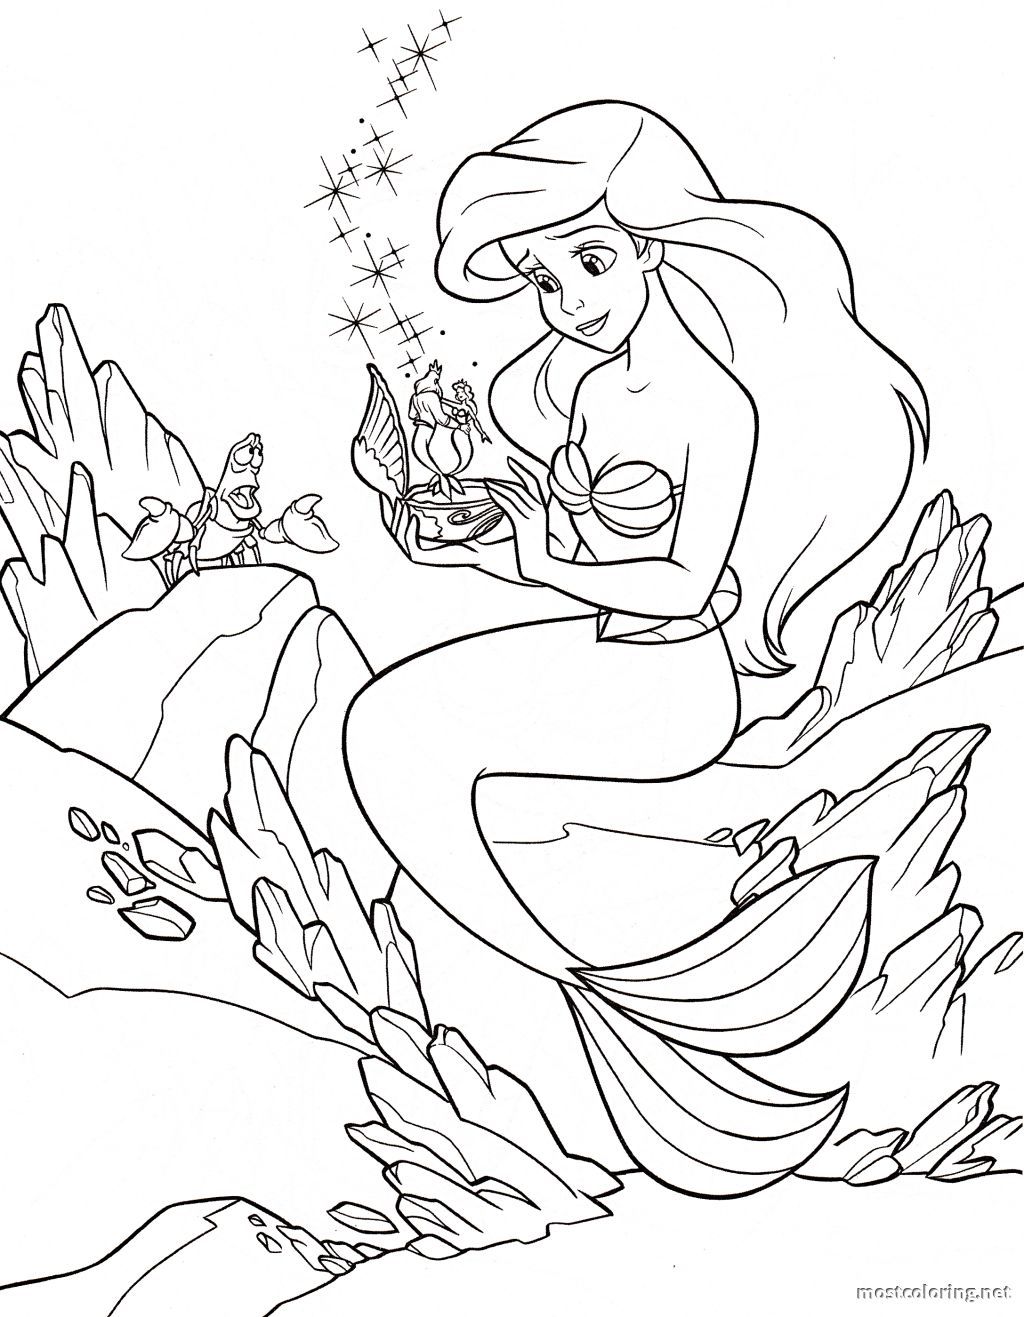 Disney Mermaid Coloring Pages | Coloring Pages Printable